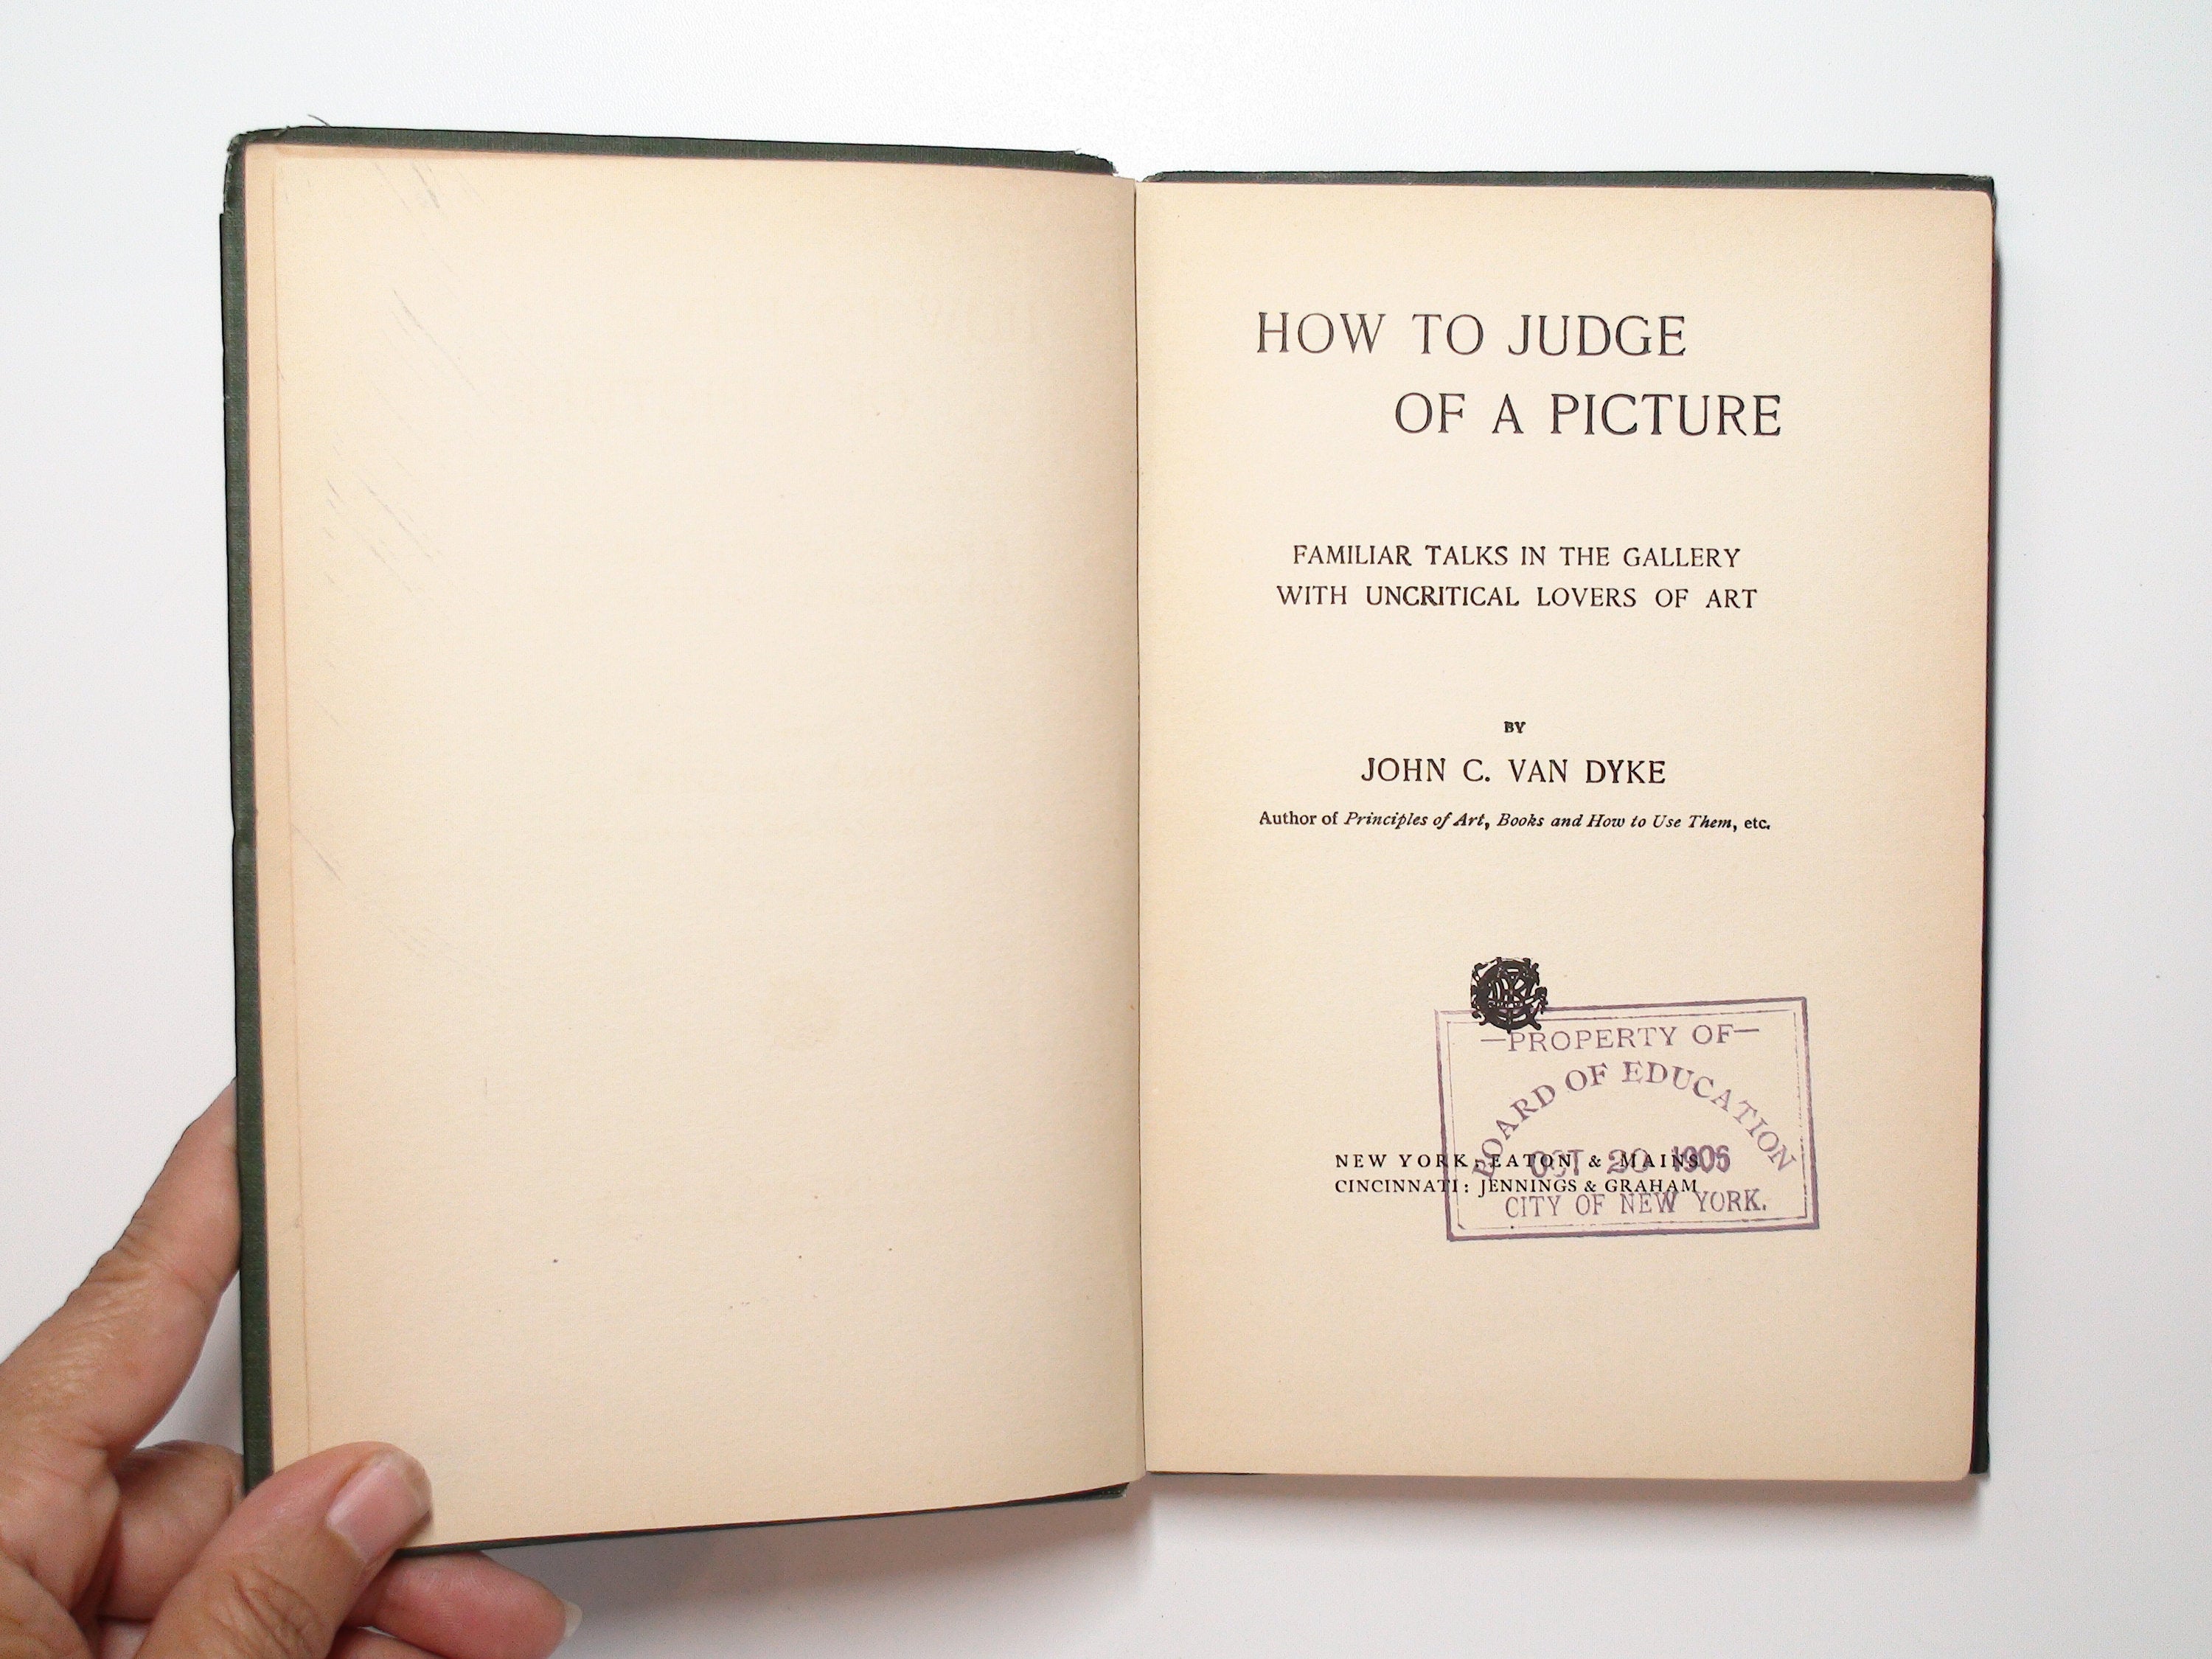 How To Judge of a Picture, Familiar Talks in the Gallery, John C. Van Dyke, 1889